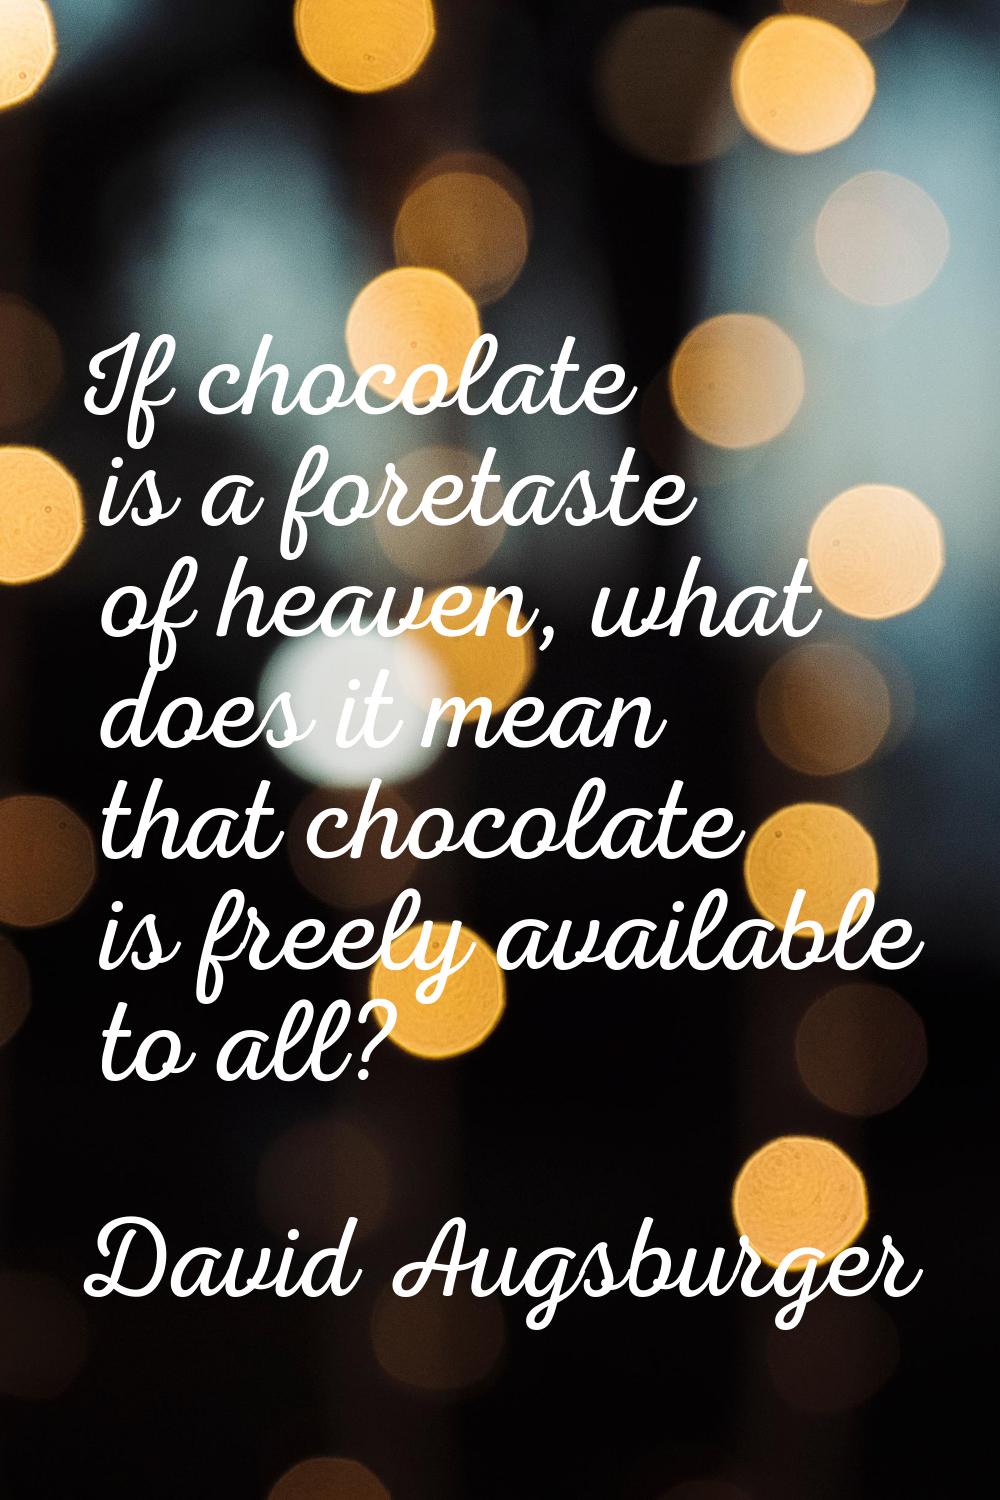 If chocolate is a foretaste of heaven, what does it mean that chocolate is freely available to all?